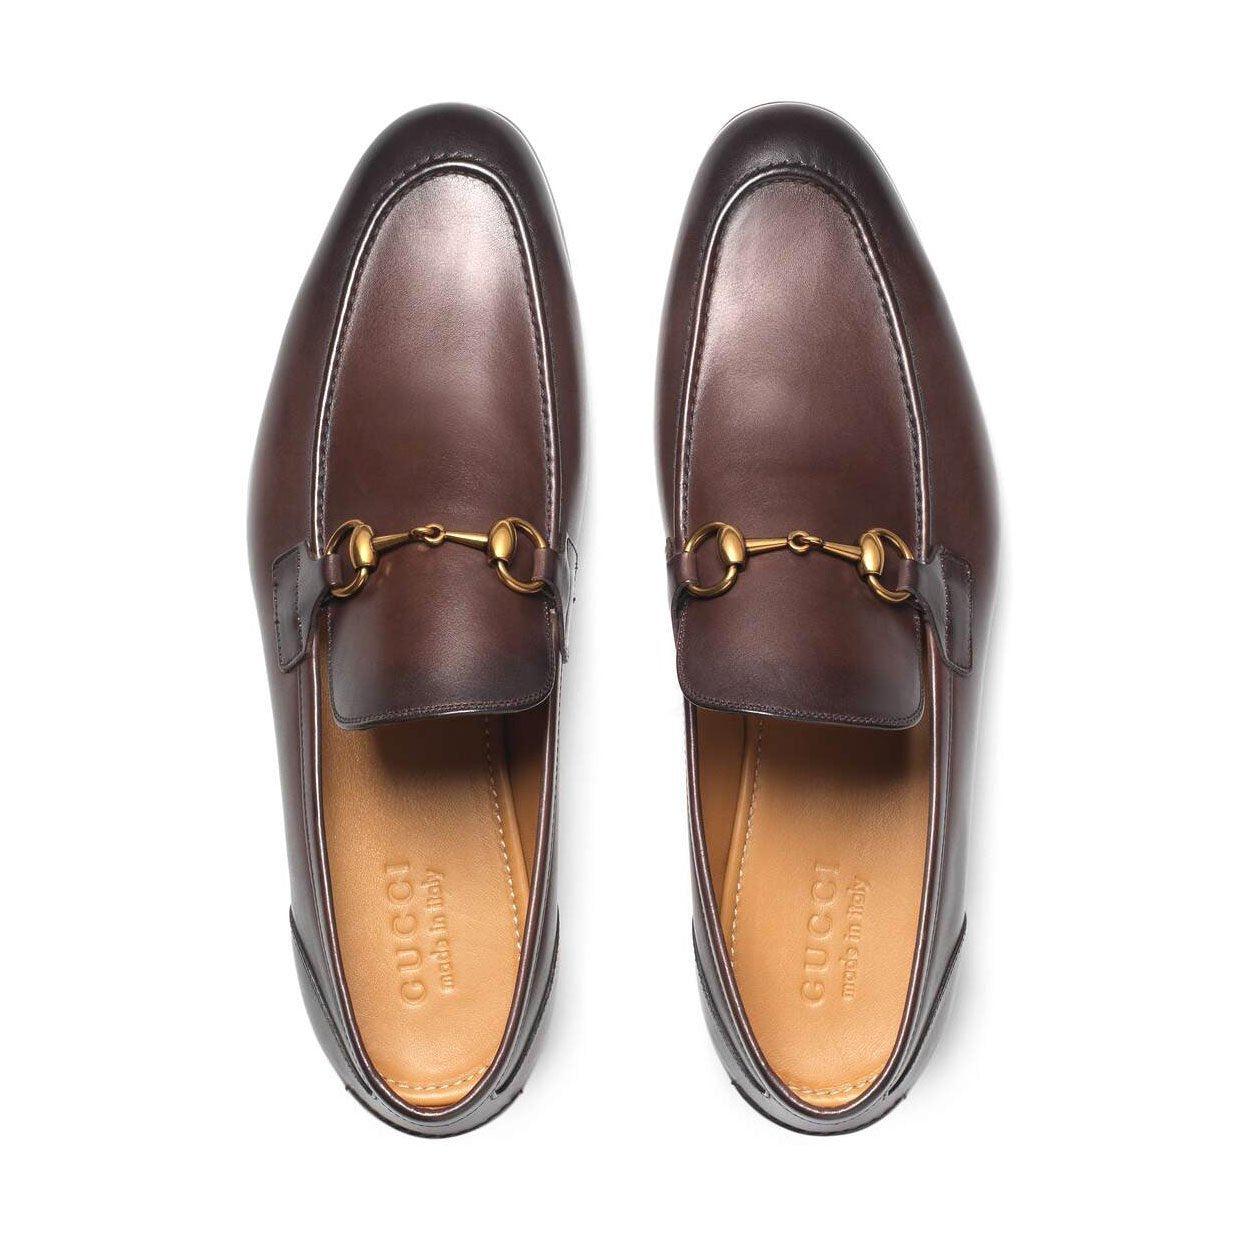 Gucci Jordaan Shoes Dark Leather Loafers Bit 406994 (GGM1706) in Brown for  Men - Save 5% | Lyst